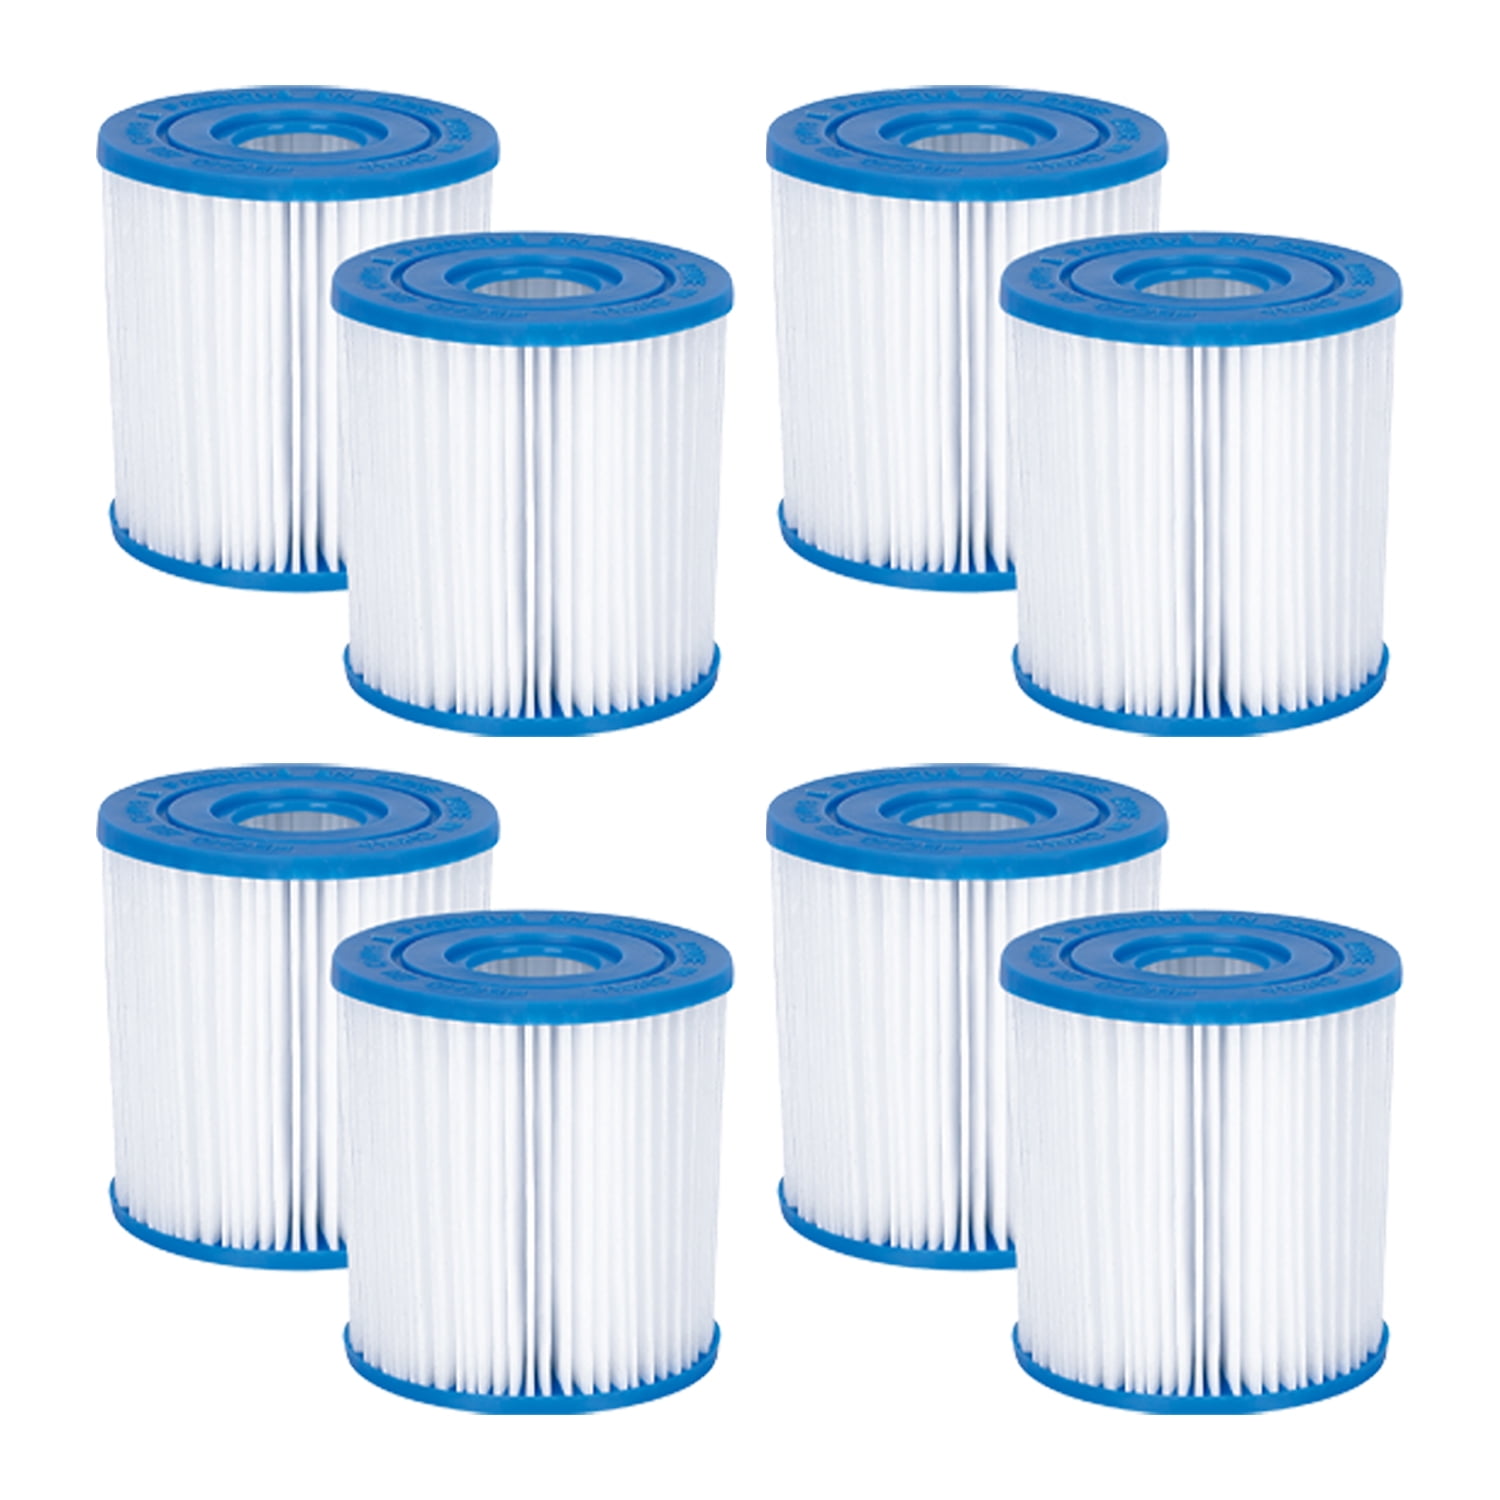 Details about   Summer Waves Polygroup Pool Filter Cartridge Replacement Size Type A or C 2 Pack 